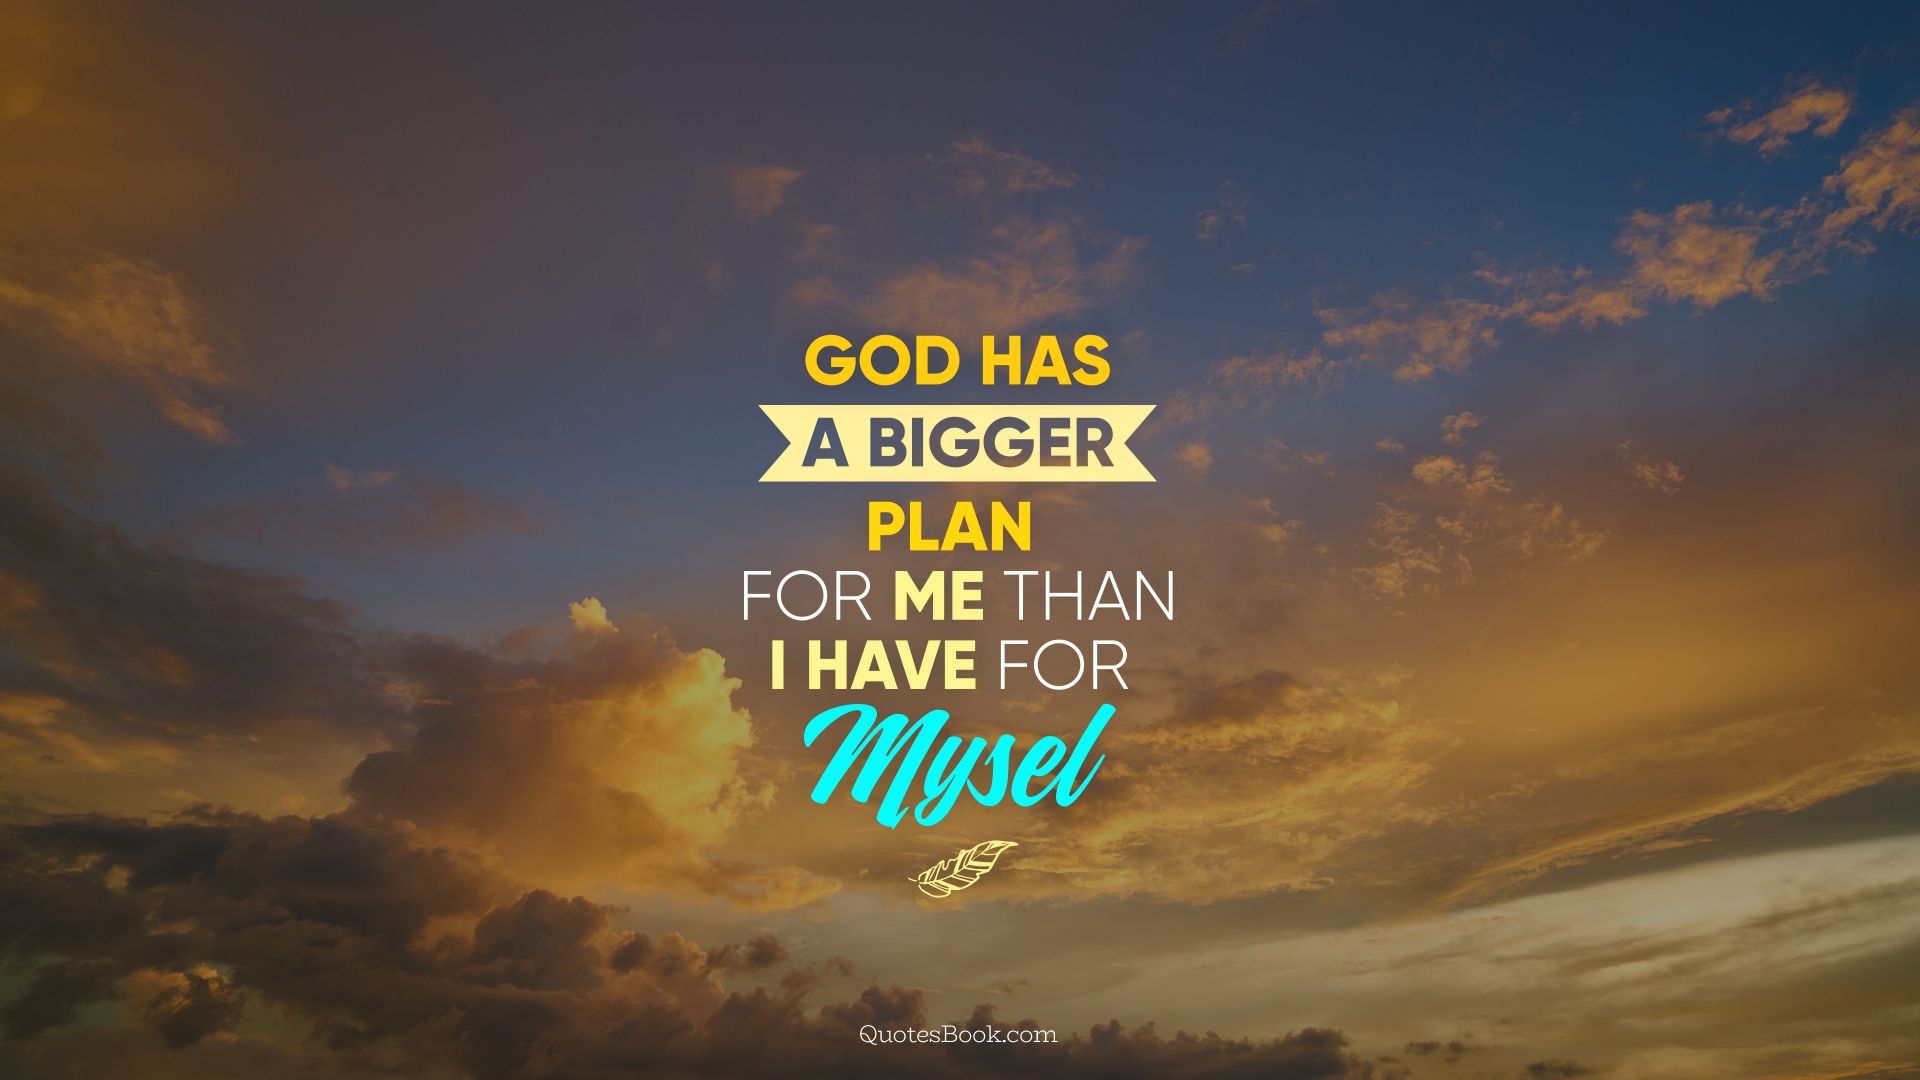 God has a bigger plan for me than I have for myself